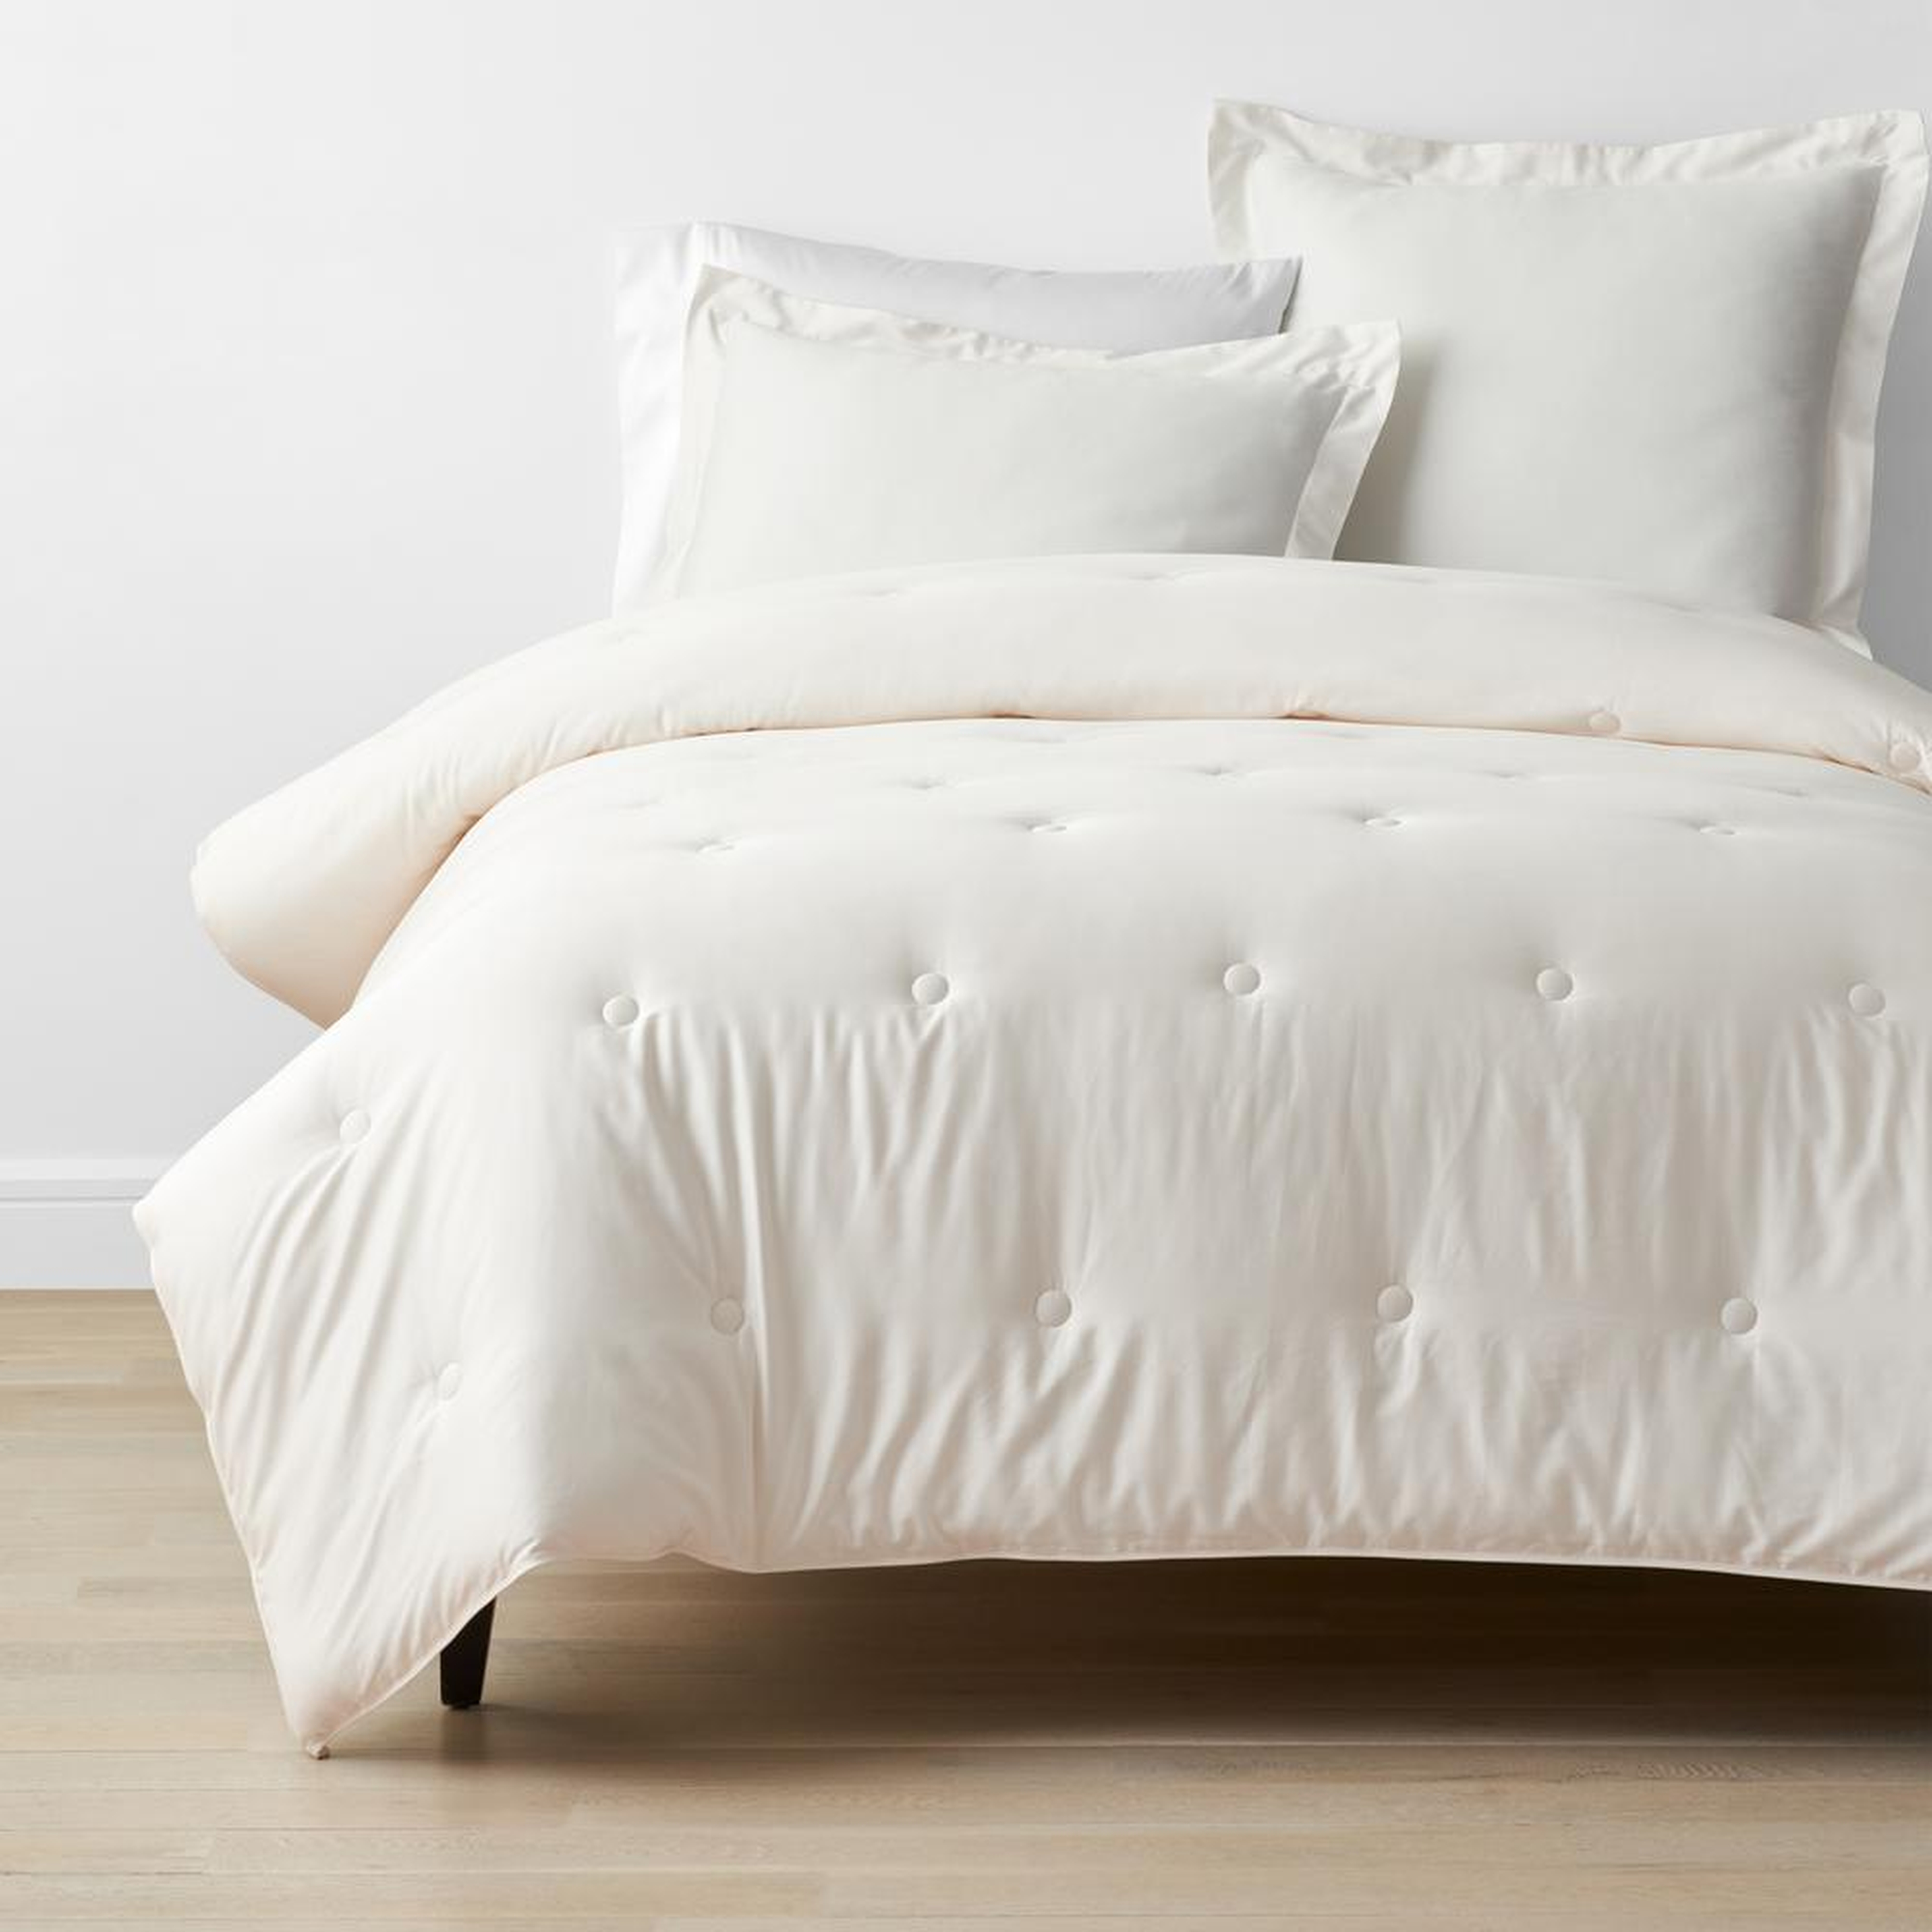 Ivory Bamboo Cotton King Comforter - Home Depot